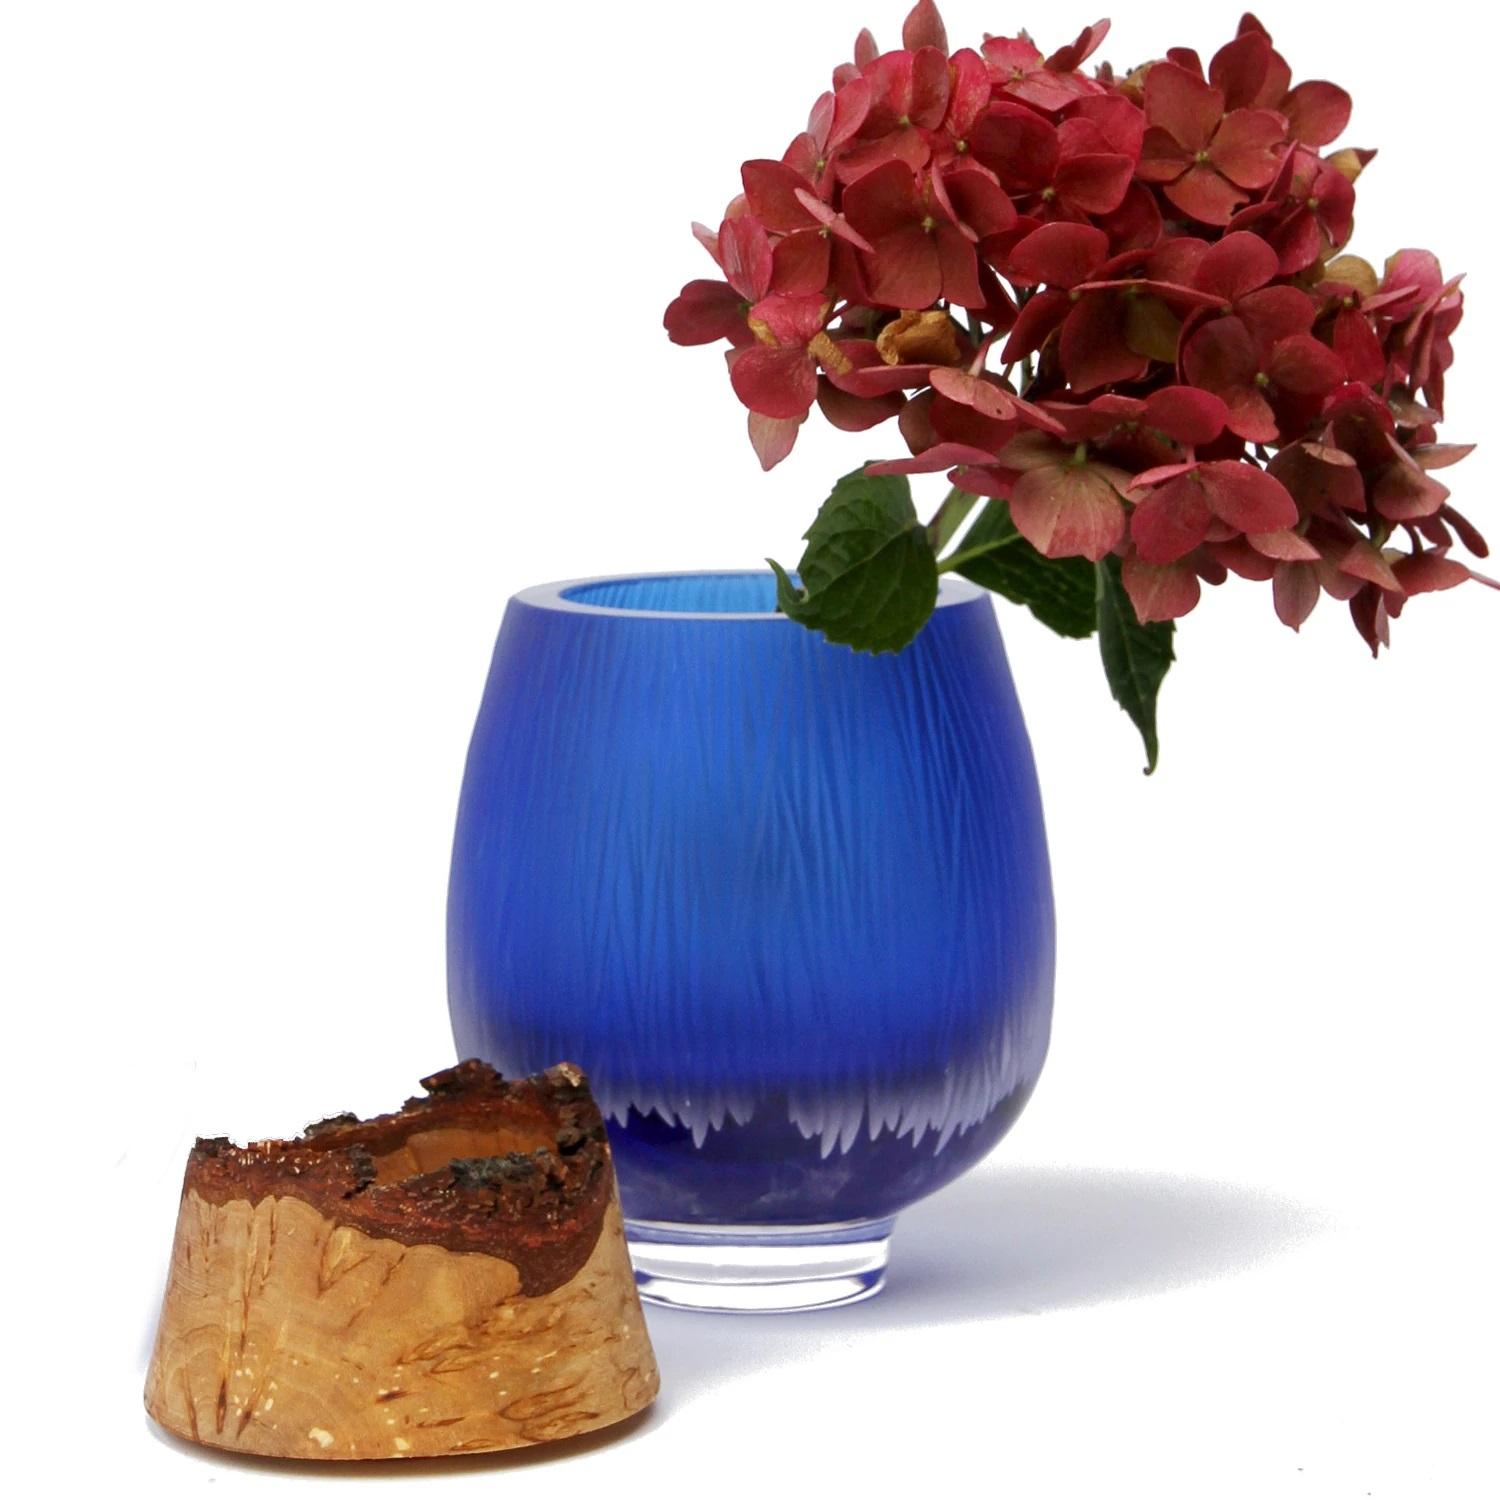 Iris Blue Frida with fine cuts stacking vessel, Pia Wüstenberg
Dimensions: D 13 x H 20
Materials: cut glass, wood
Available in other colors.

With its sculpted glass topped by Curly Birch, Poppy is an exquisite vessel. This delightful piece